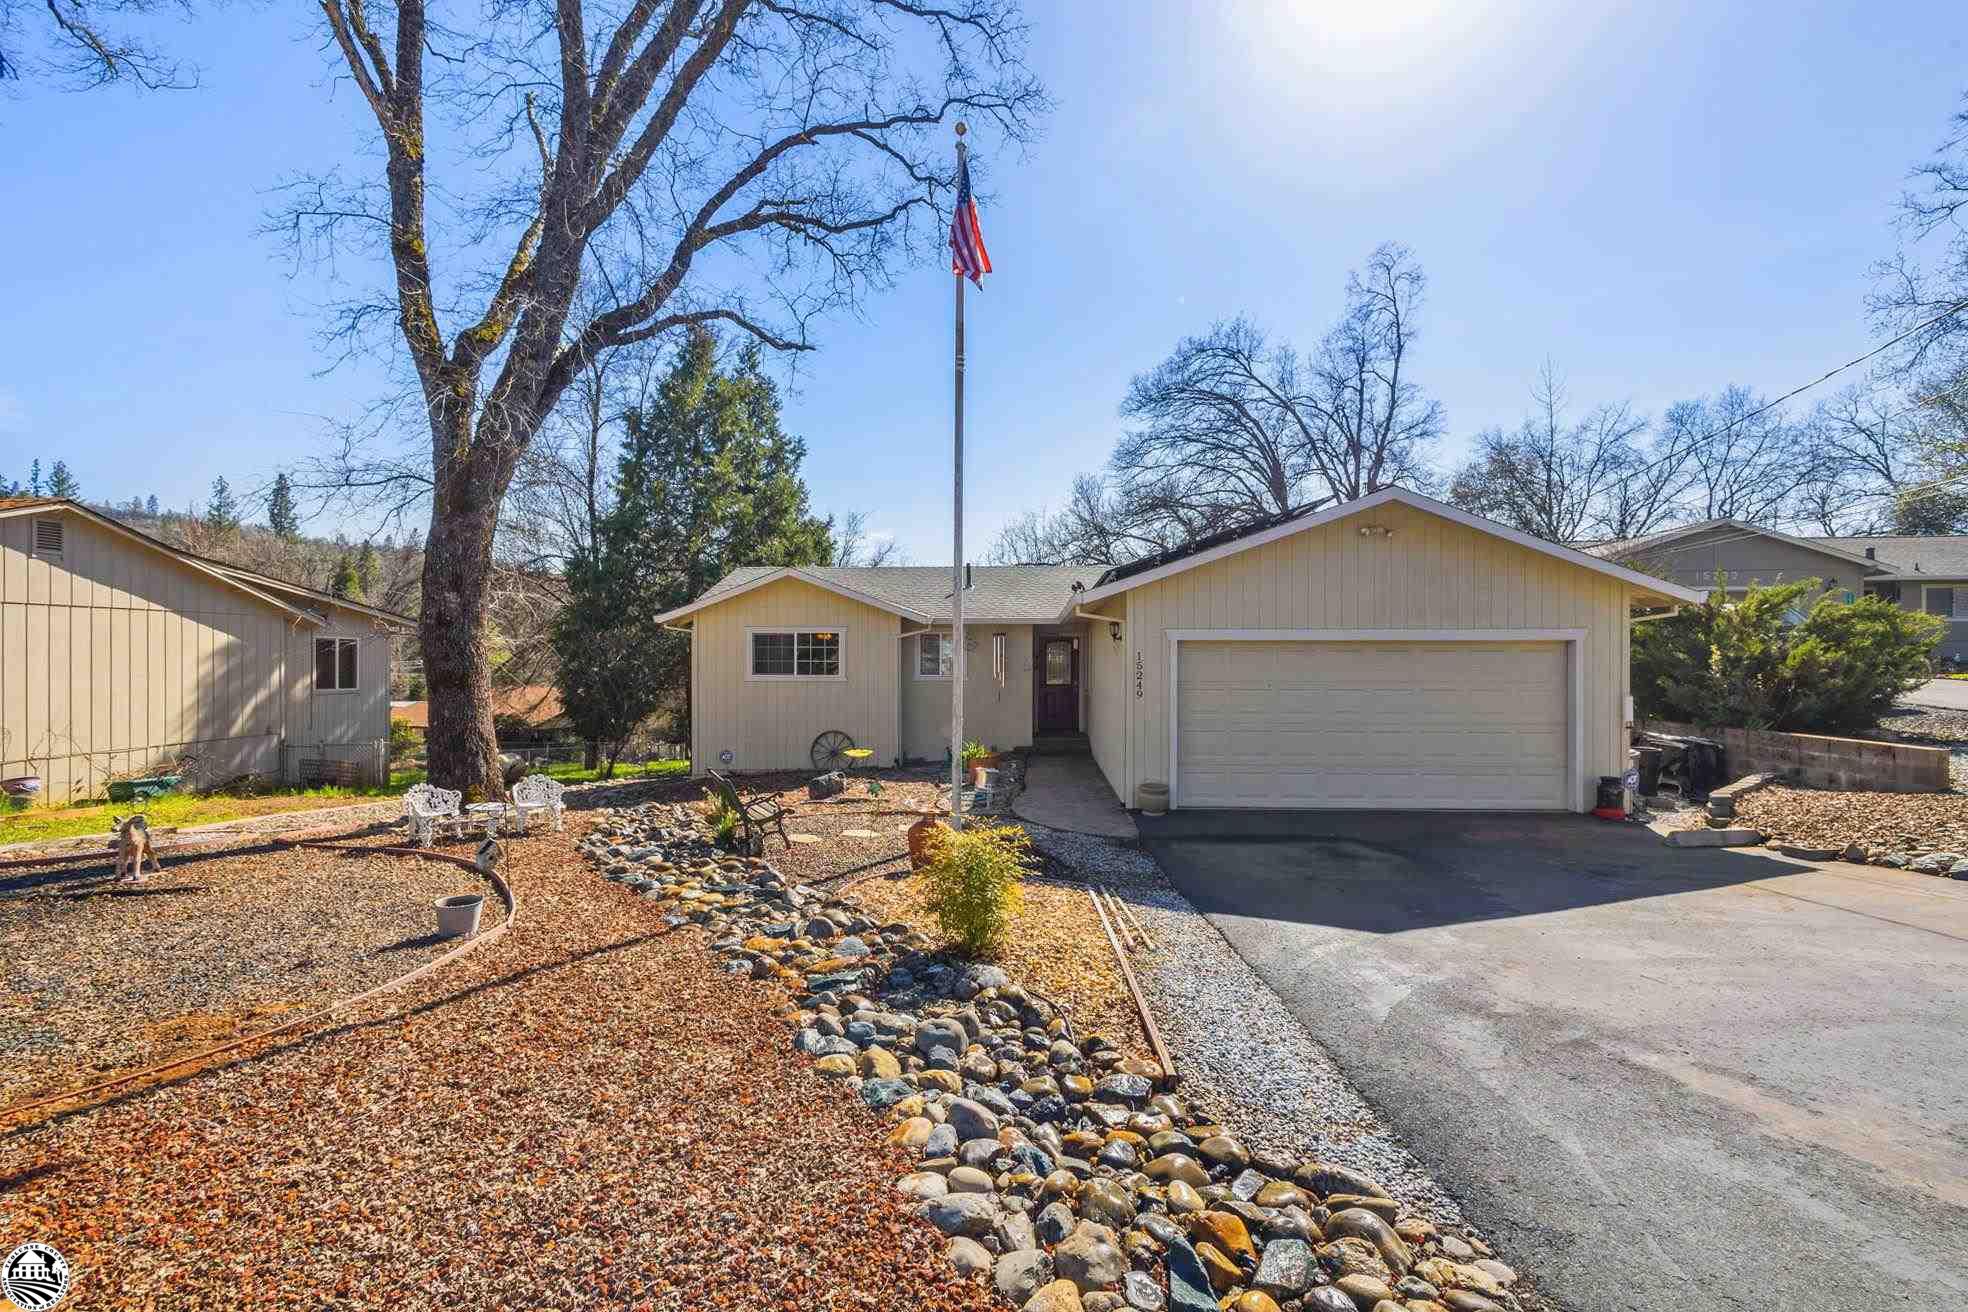 *** OPEN HOUSE this Sat June 10th, from 11am - 1pm***ALL LEVEL home on a quiet cul-de-sac, on the Phoenix Lake corridor. Energy efficient features including 40+ Solar panels, tankless water heater, ceiling fans in every room, and lots of drought tolerant hardscape. The open living room with a tile fireplace and kitchen nook is perfect for entertaining guests or spending time with family. Owners have thoughtfully upgraded with hardwood floors, soffit lighting, and window coverings, adding to the home's charm. Beautiful French doors leading out to the private and spacious backyard, create a seamless transition between indoor and outdoor living. The Pergola sits centrally in the back yard, with lots of stonework, paths, and room to play. The horseshoe pit is a fun and unique feature, with lots of open seating areas. Lots of room to park with an oversized 2 car garage, and extended driveway. Come take a look today